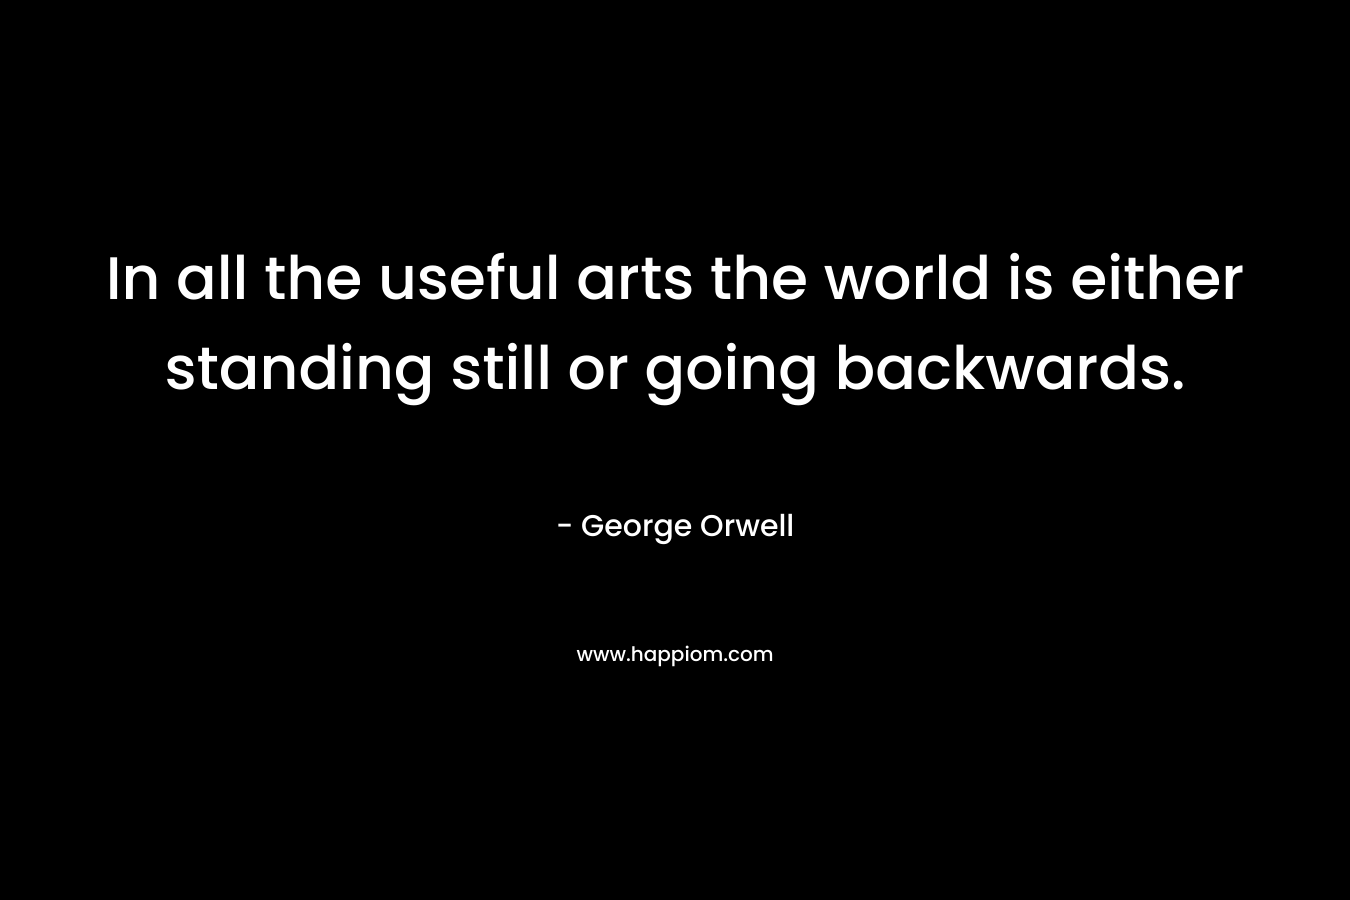 In all the useful arts the world is either standing still or going backwards.